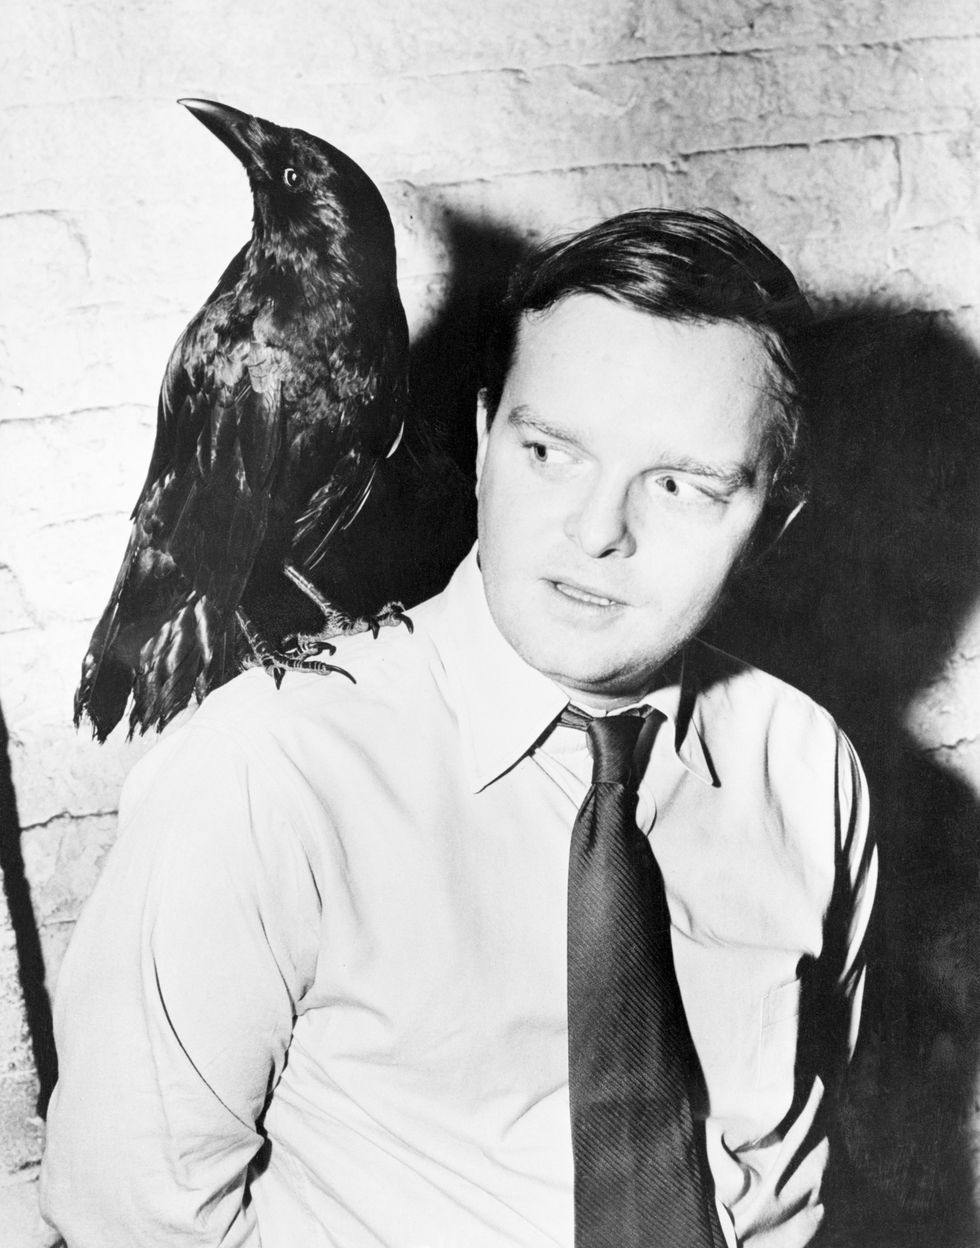 truman capote stands against a brick wall with a crow on his shoulder, he wears a collared shirt and tie and looks to the left